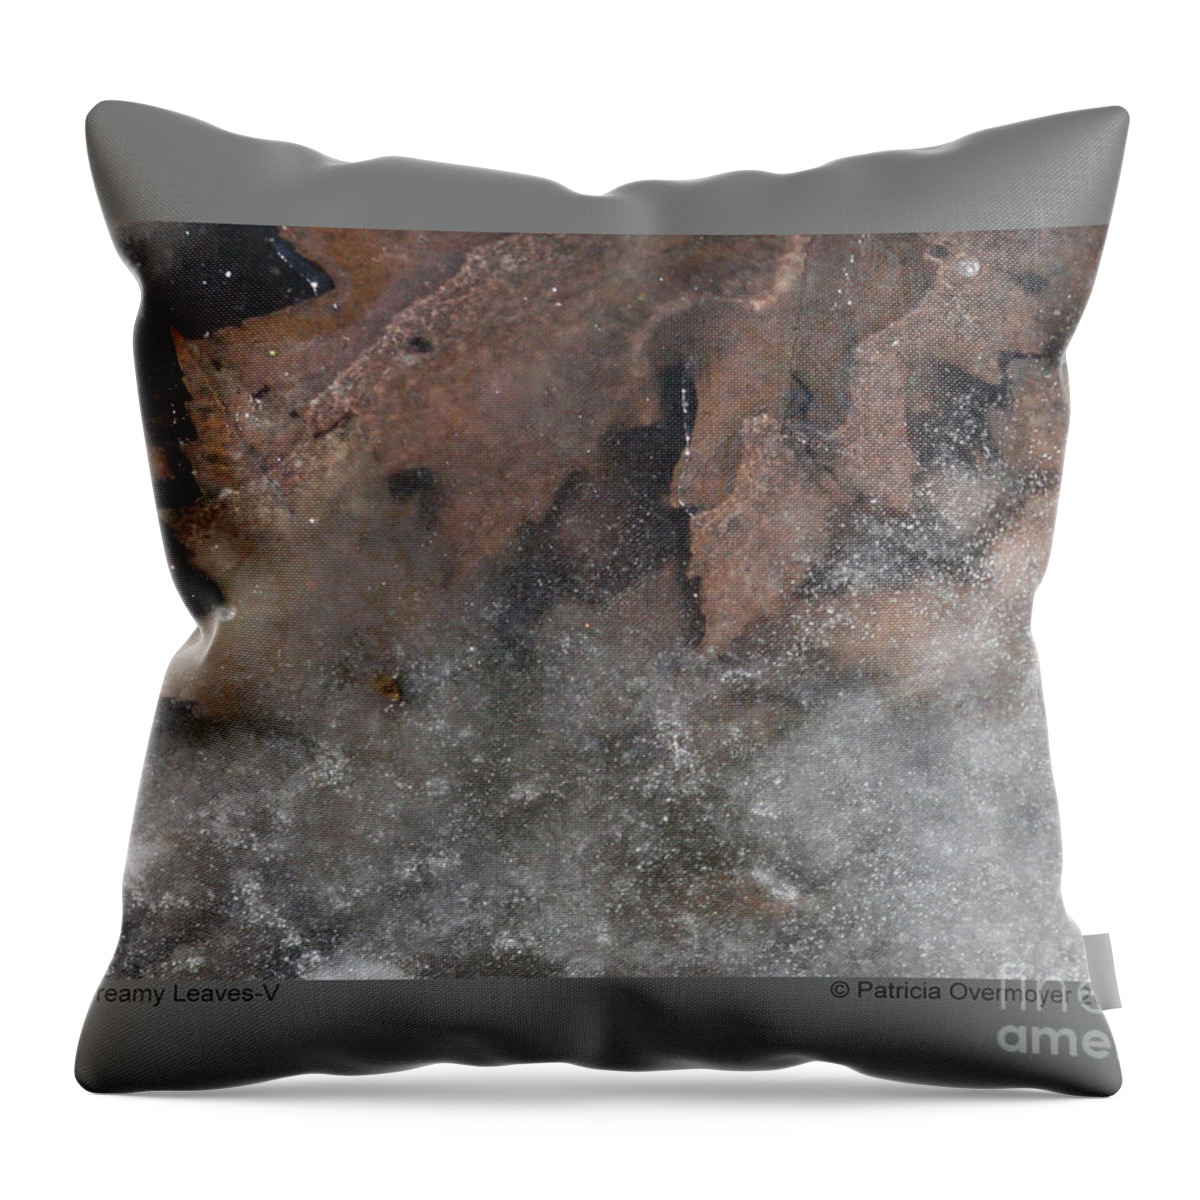 Leaf Throw Pillow featuring the photograph Dreamy Leaves-V by Patricia Overmoyer